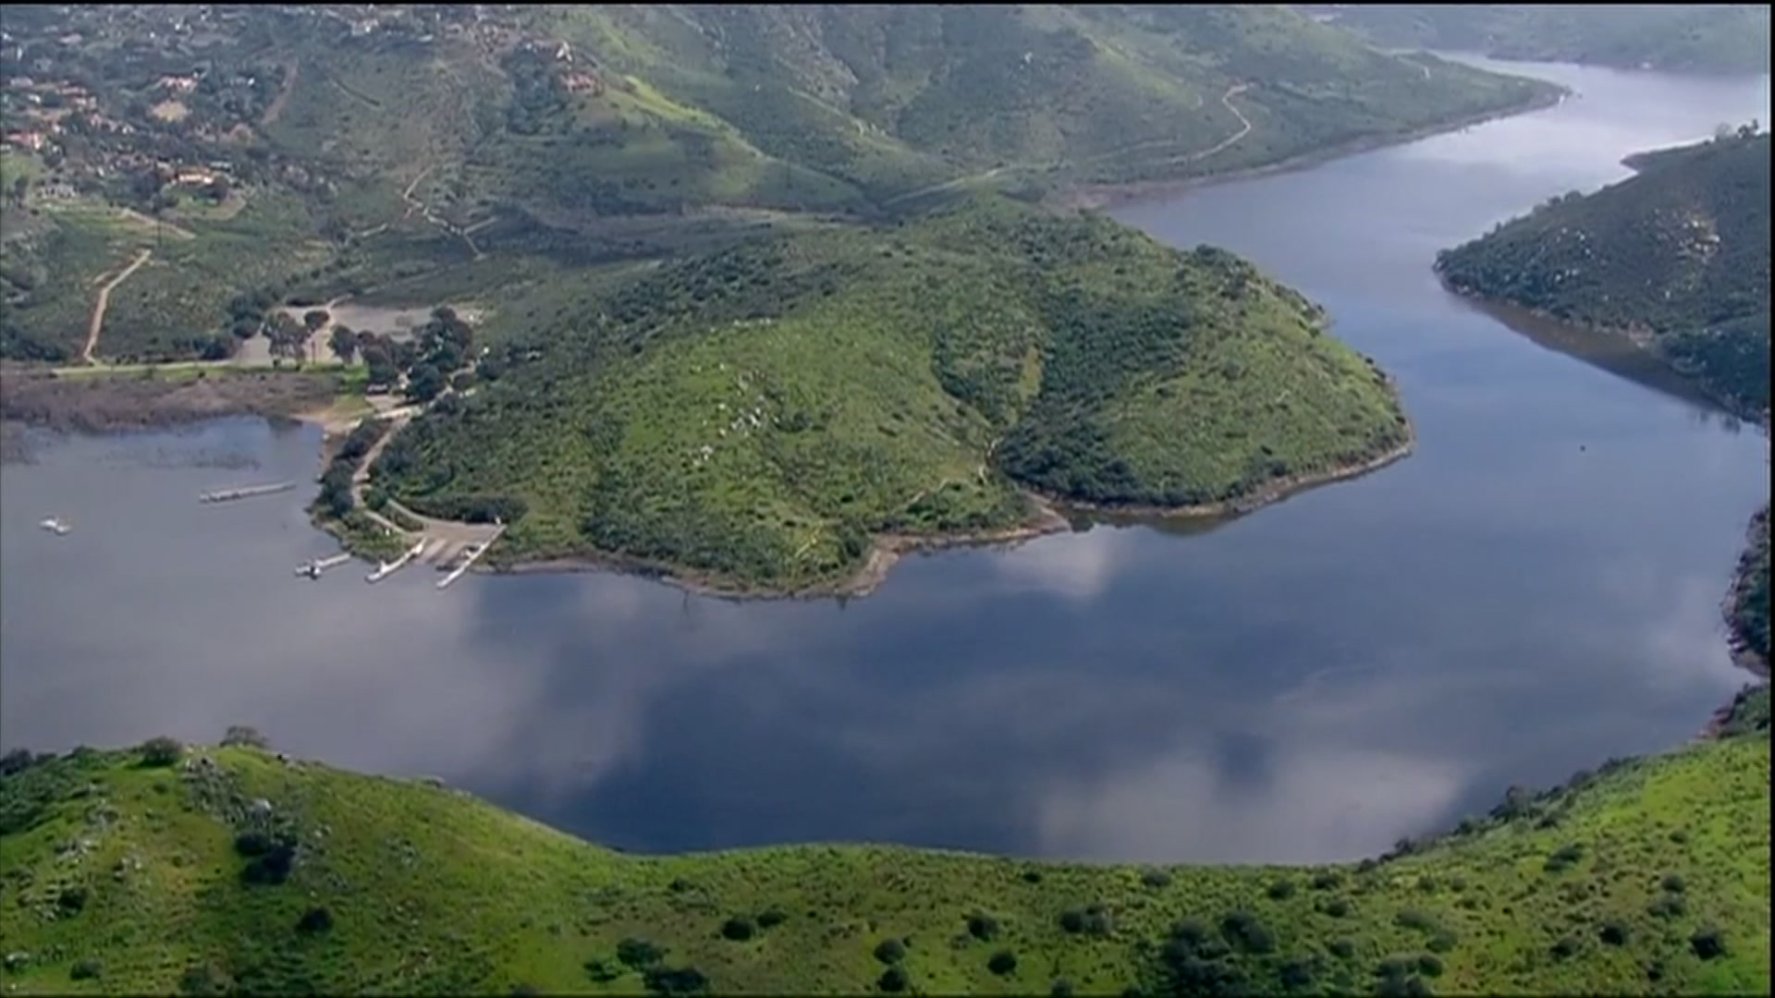 923M Gallons of Water Released From Hodges Reservoir After Storm NBC